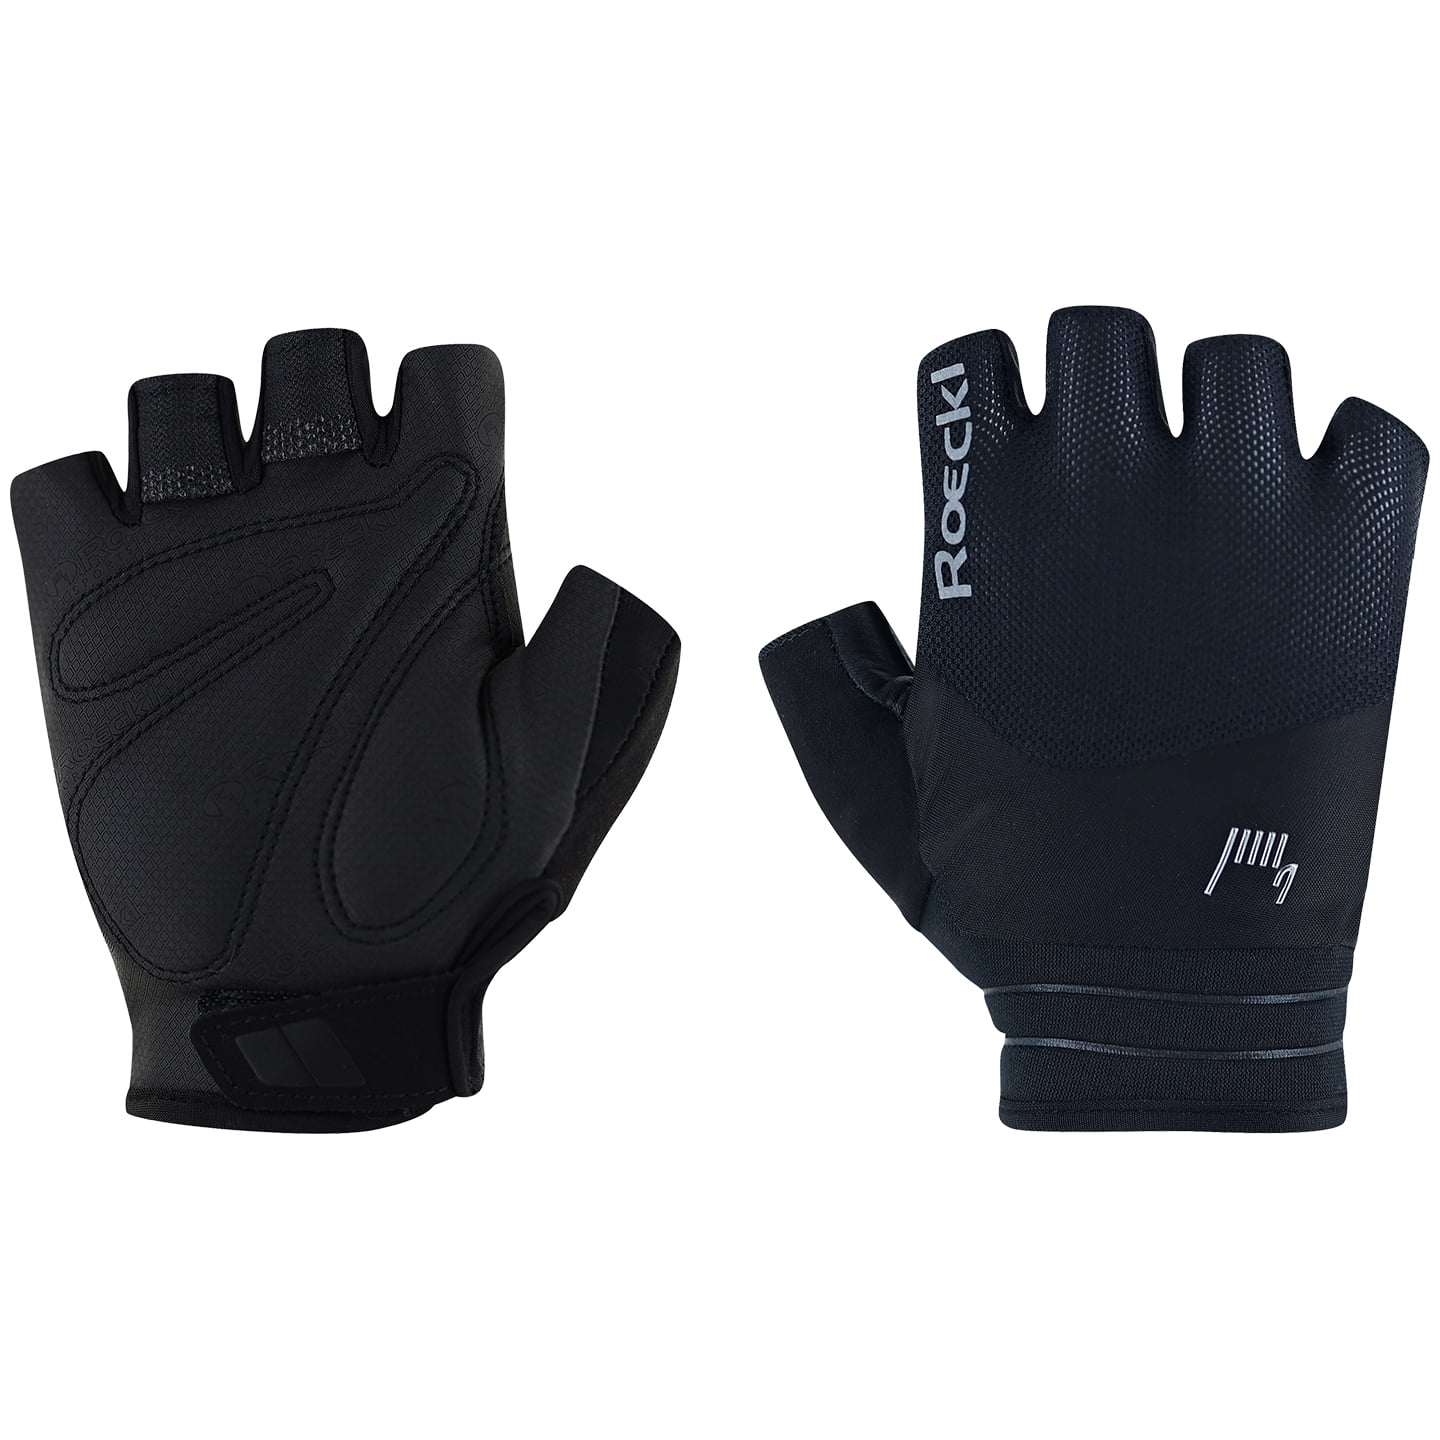 ROECKL Bonau Gloves, for men, size 7, Cycling gloves, Cycling clothes